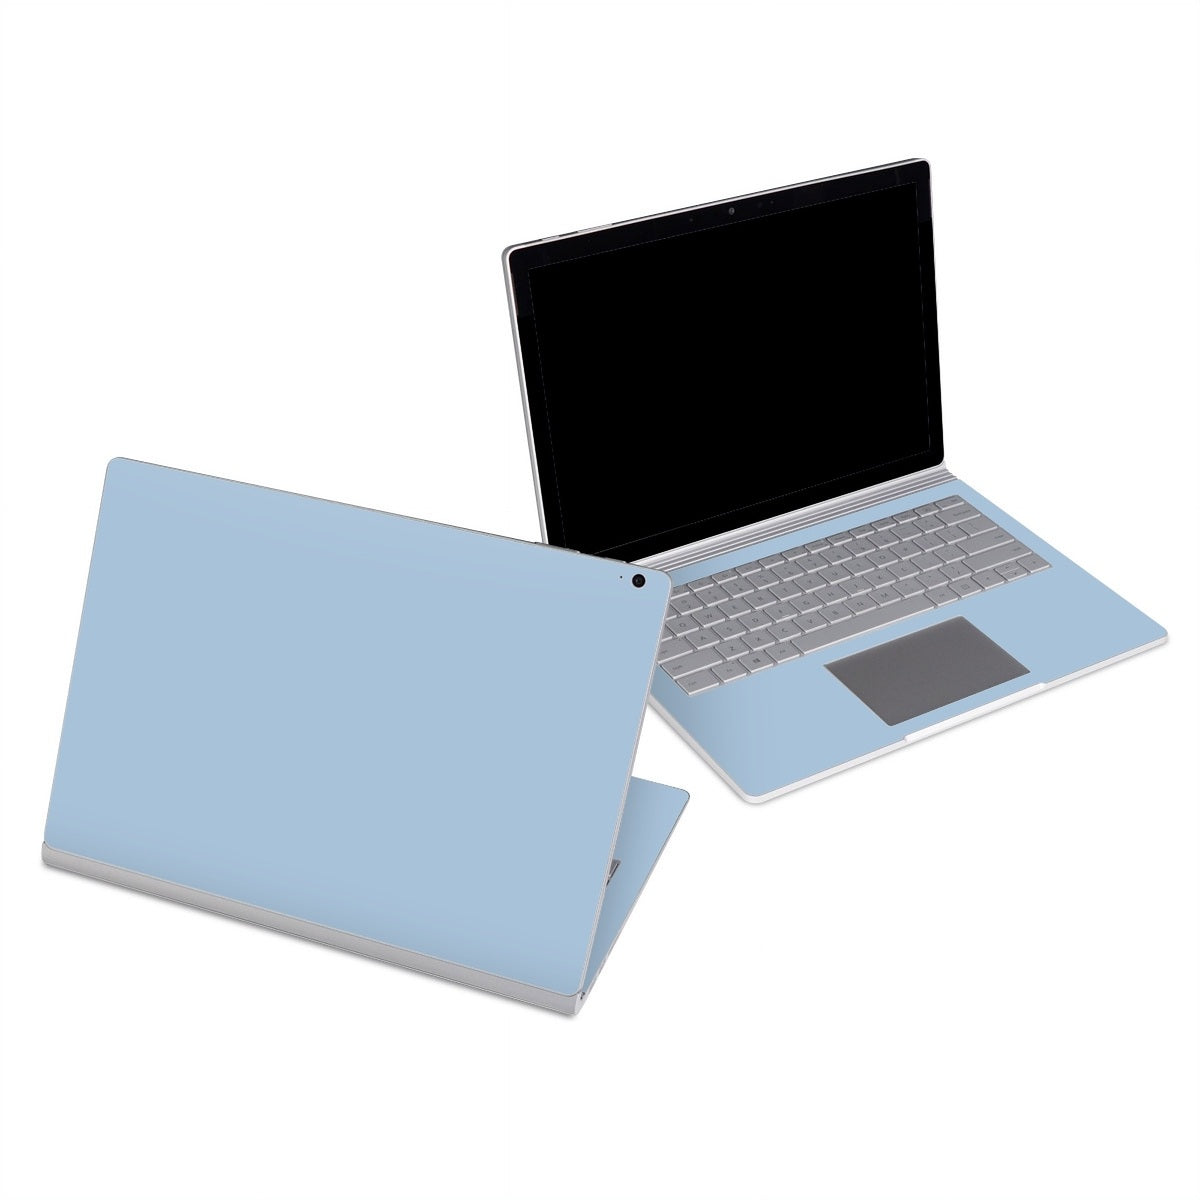 Solid State Blue Mist - Microsoft Surface Book Skin